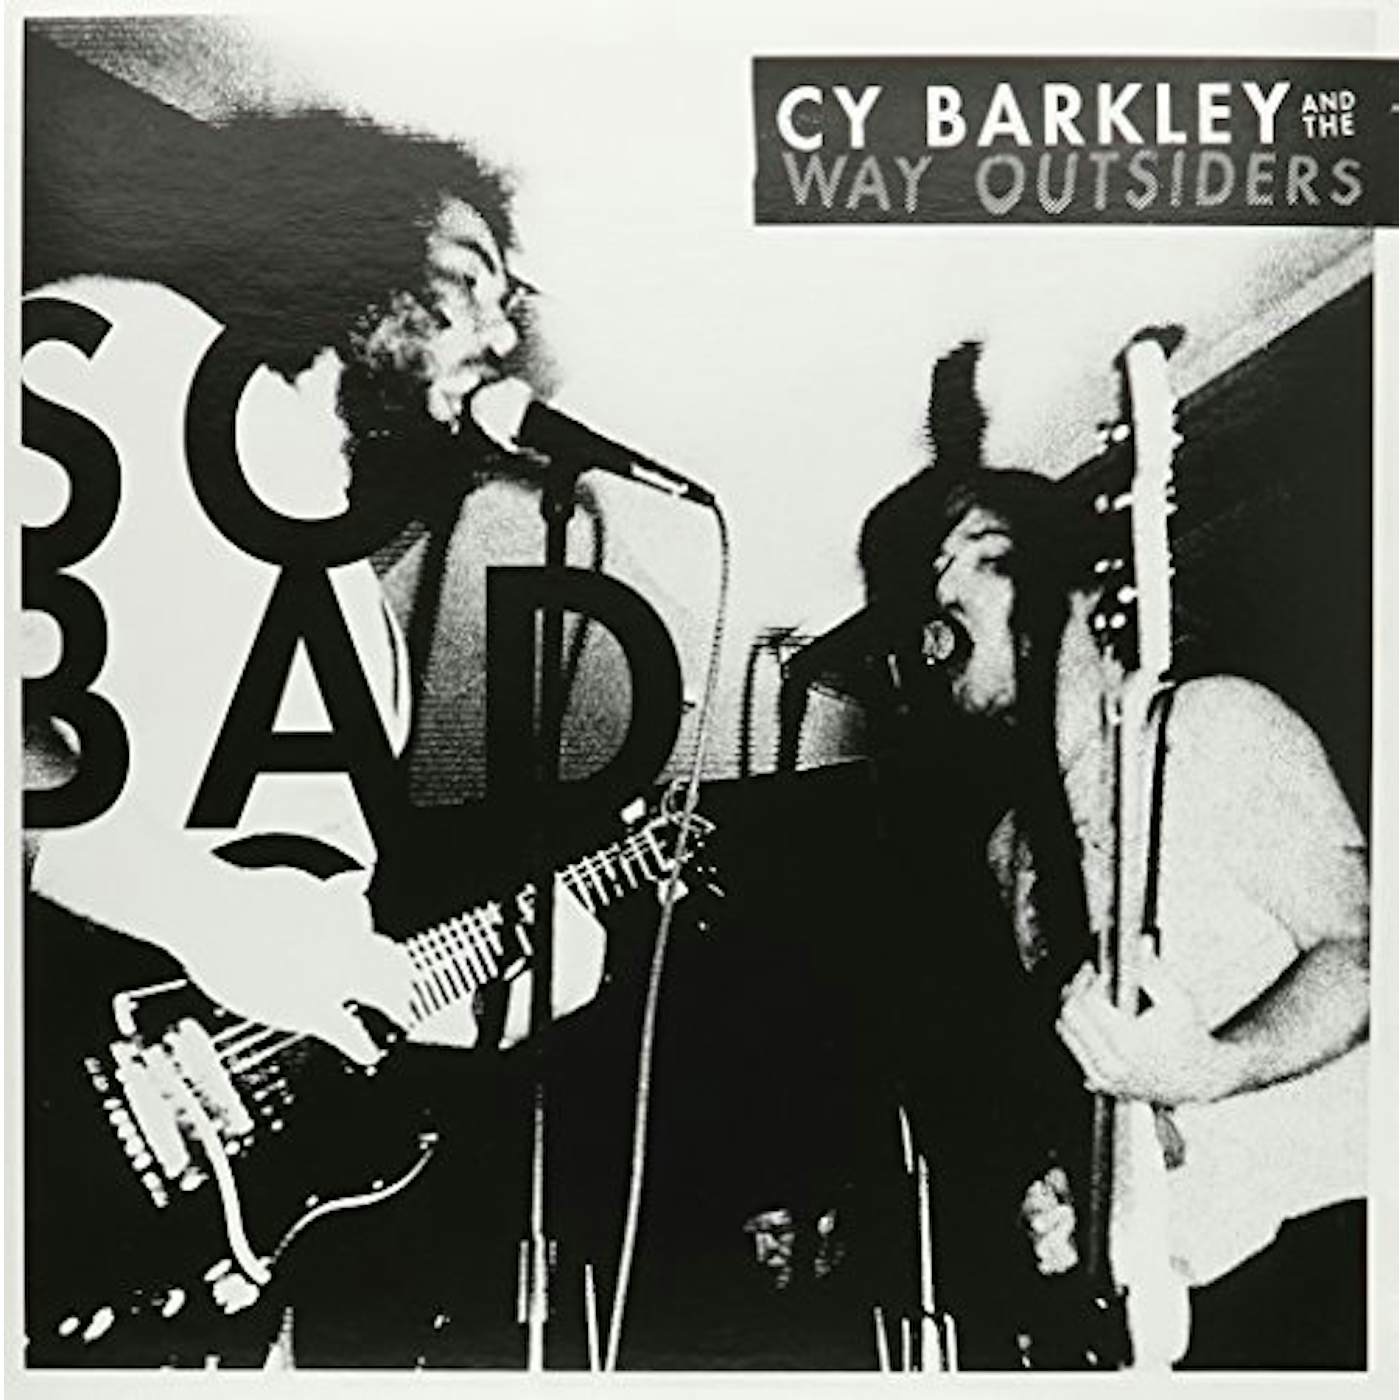 Cy Barkley and The Way Outsiders So Bad Vinyl Record